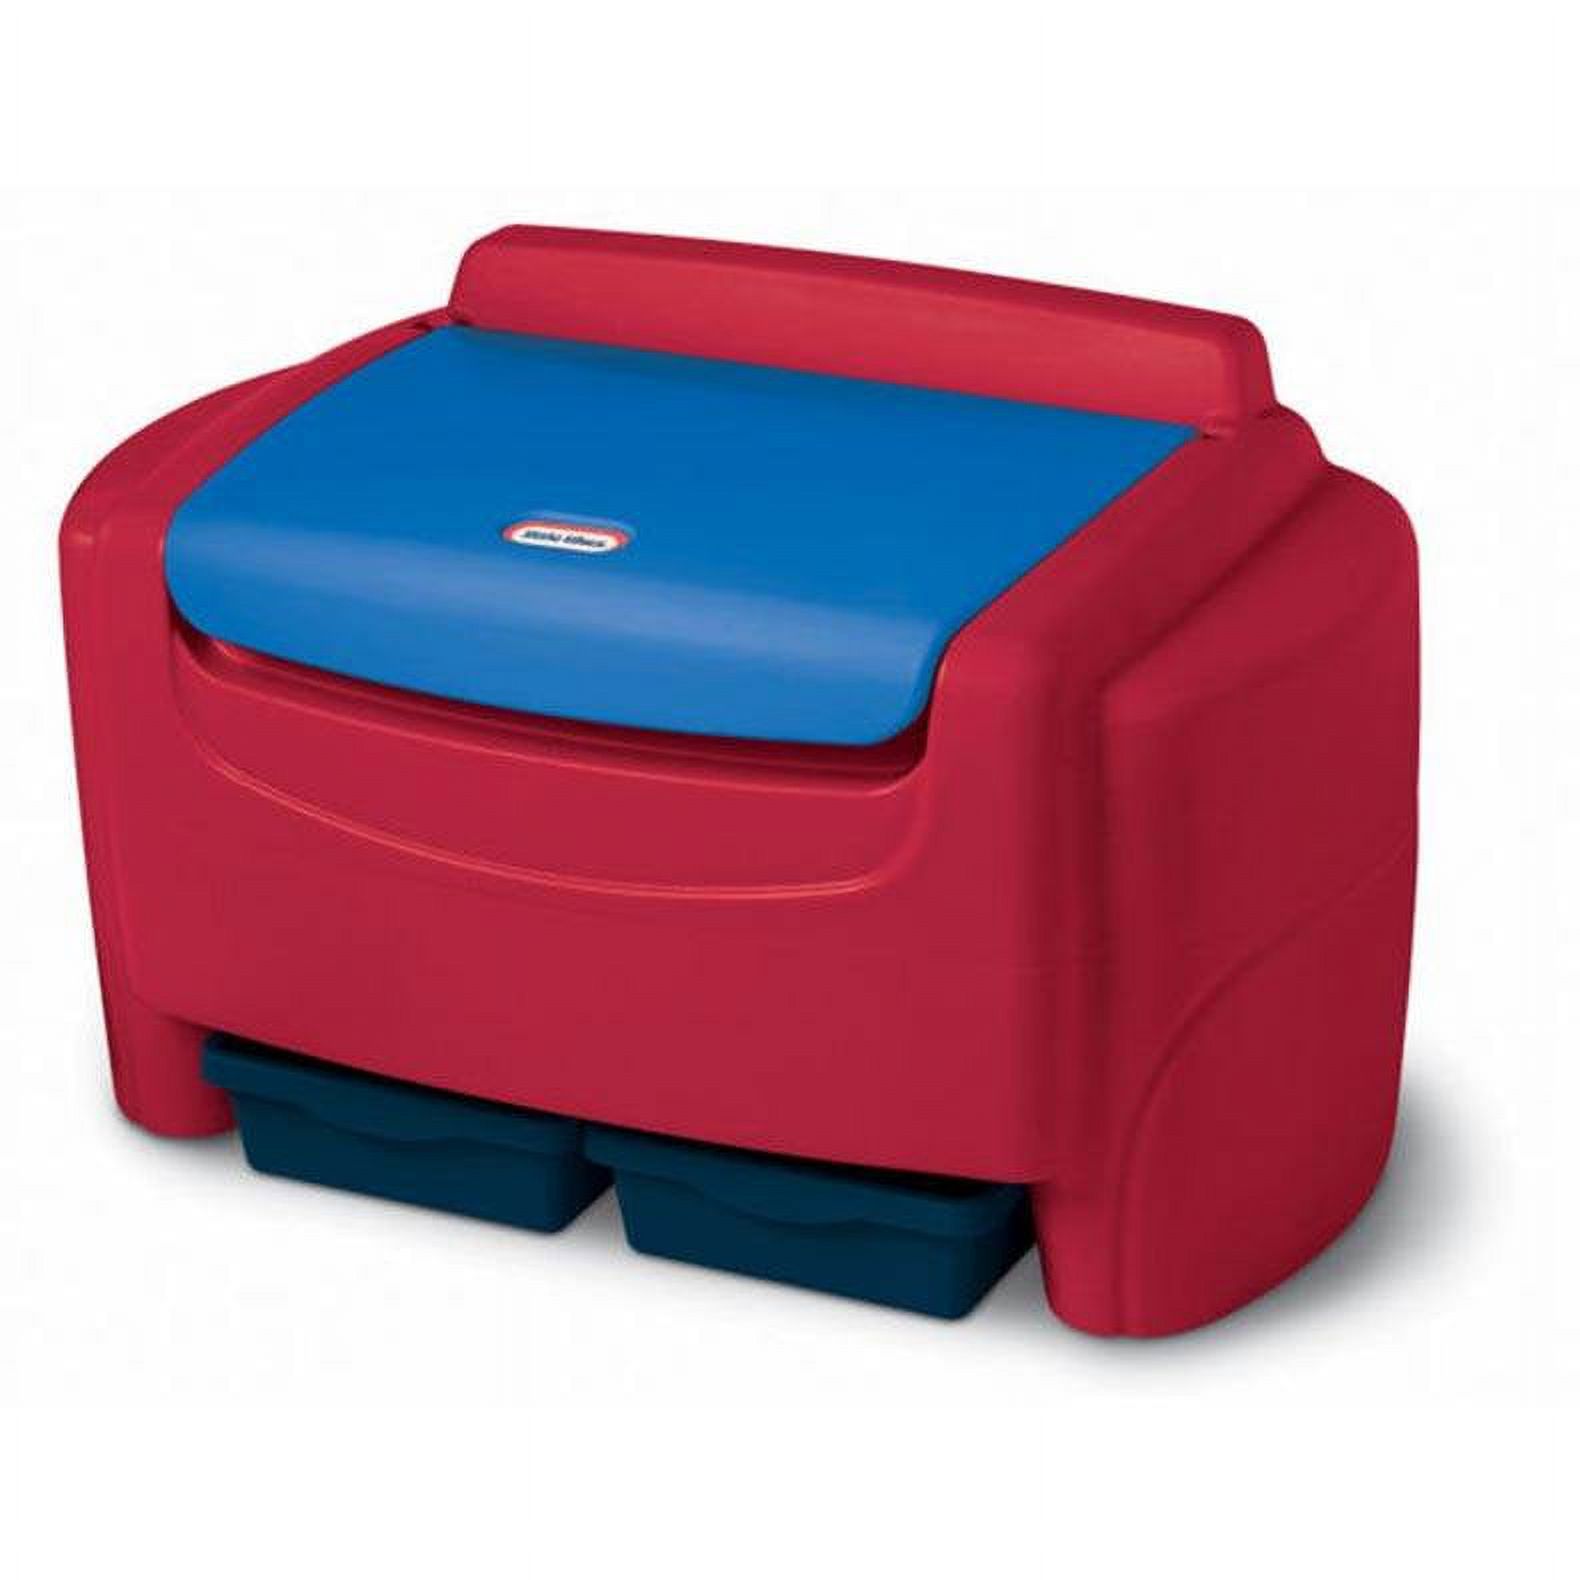 Little Tikes Sort 'n Store Toy Chest and Drawers - Primary Colors | 606540P - image 1 of 3